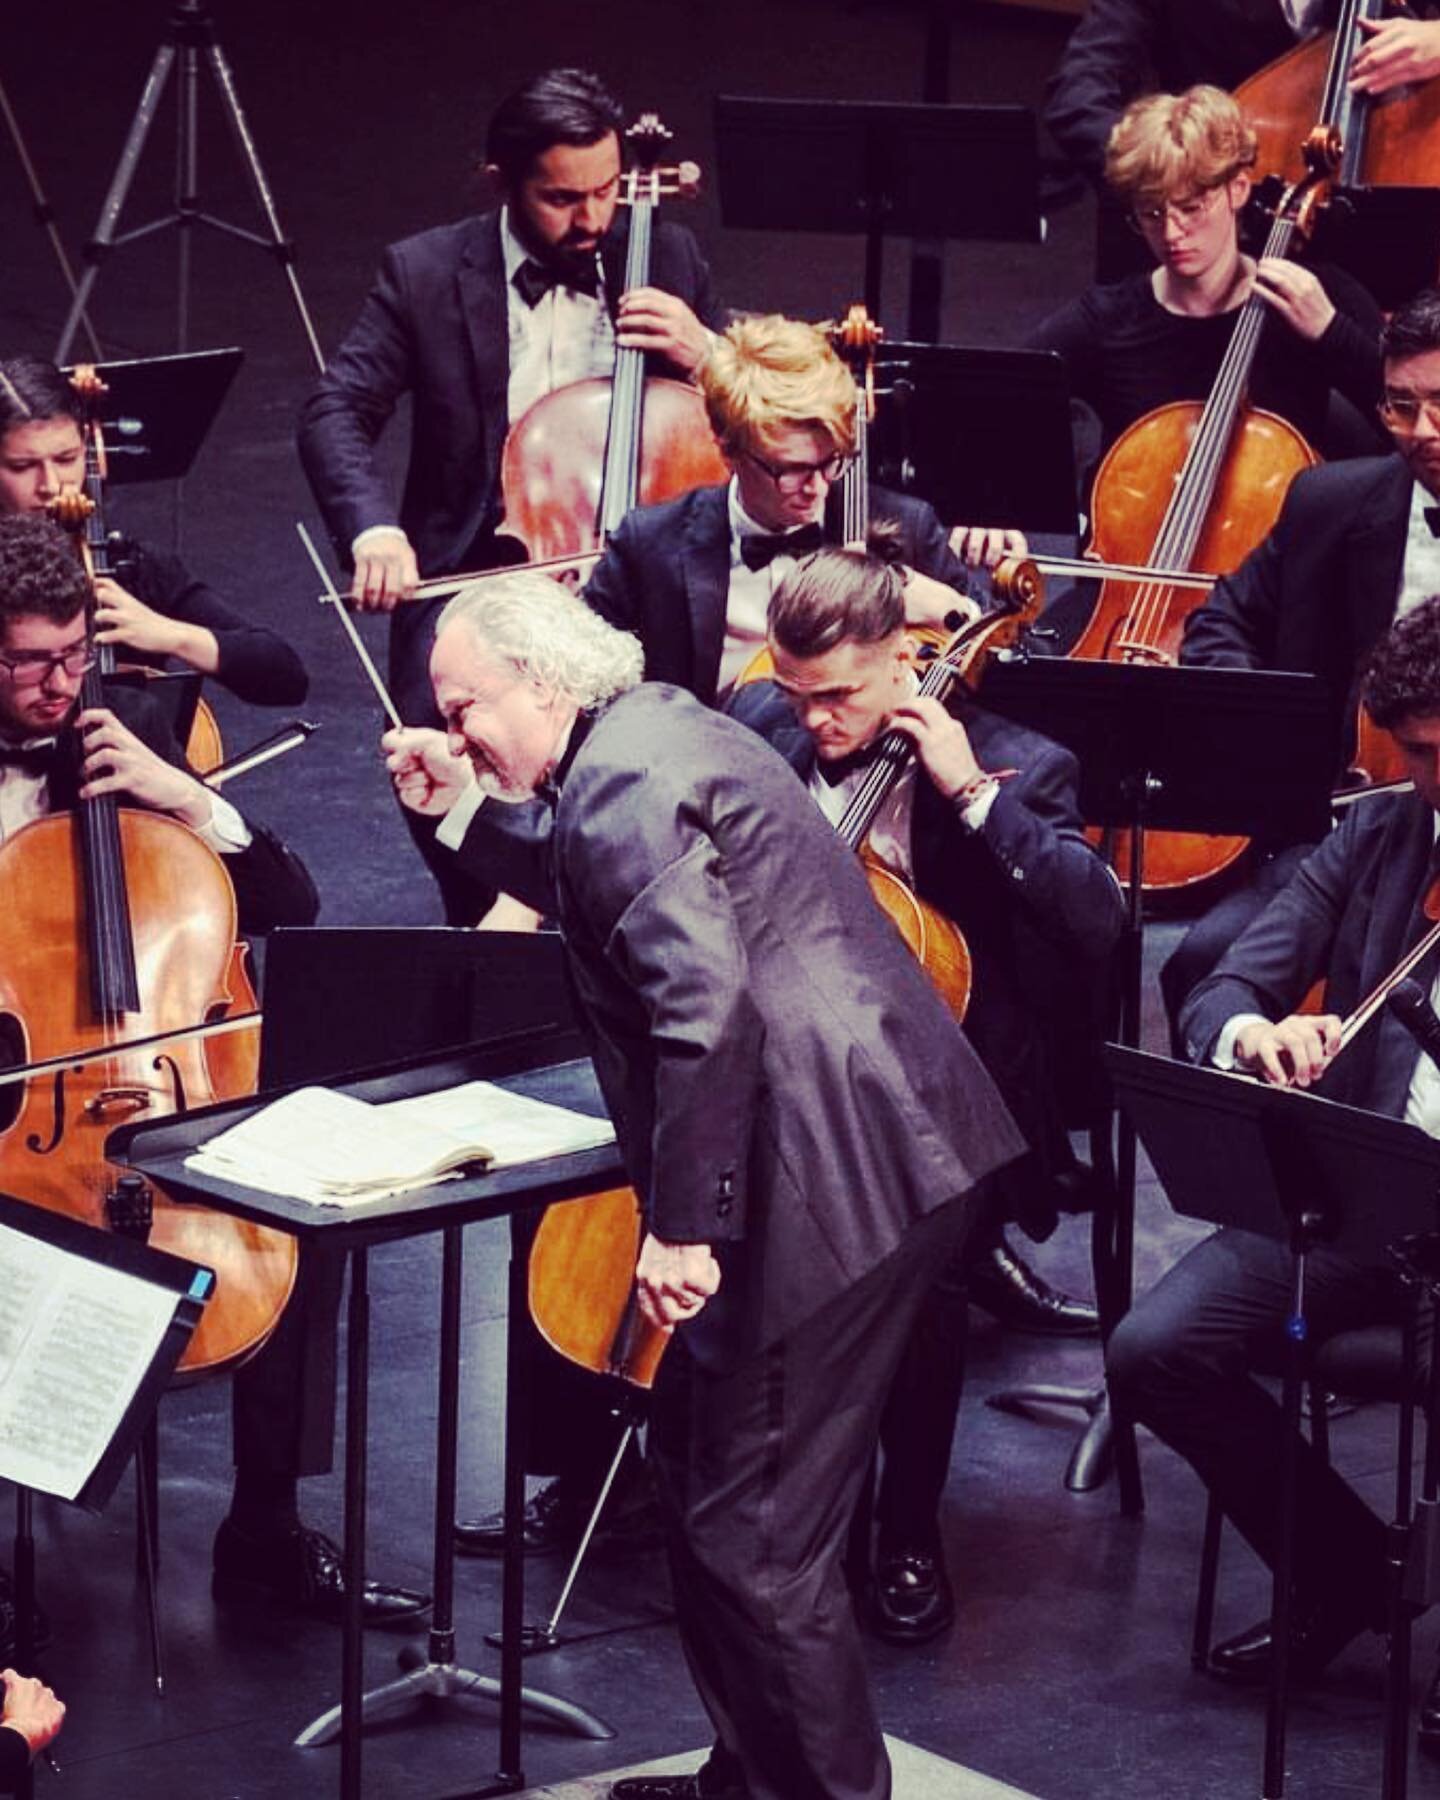 Pleasure performing for @jeffrey.grogan 😊 Thankful for this orchestra and cello section 🎶 @ocu_music @ocuorchestras @oklahomacityuniversity 
.
.
.
.
.
.
.
.
.
.
.
.
#orchestra #maestro #conductor #strings #wind  #violin #viola #cello #bass #oklahom